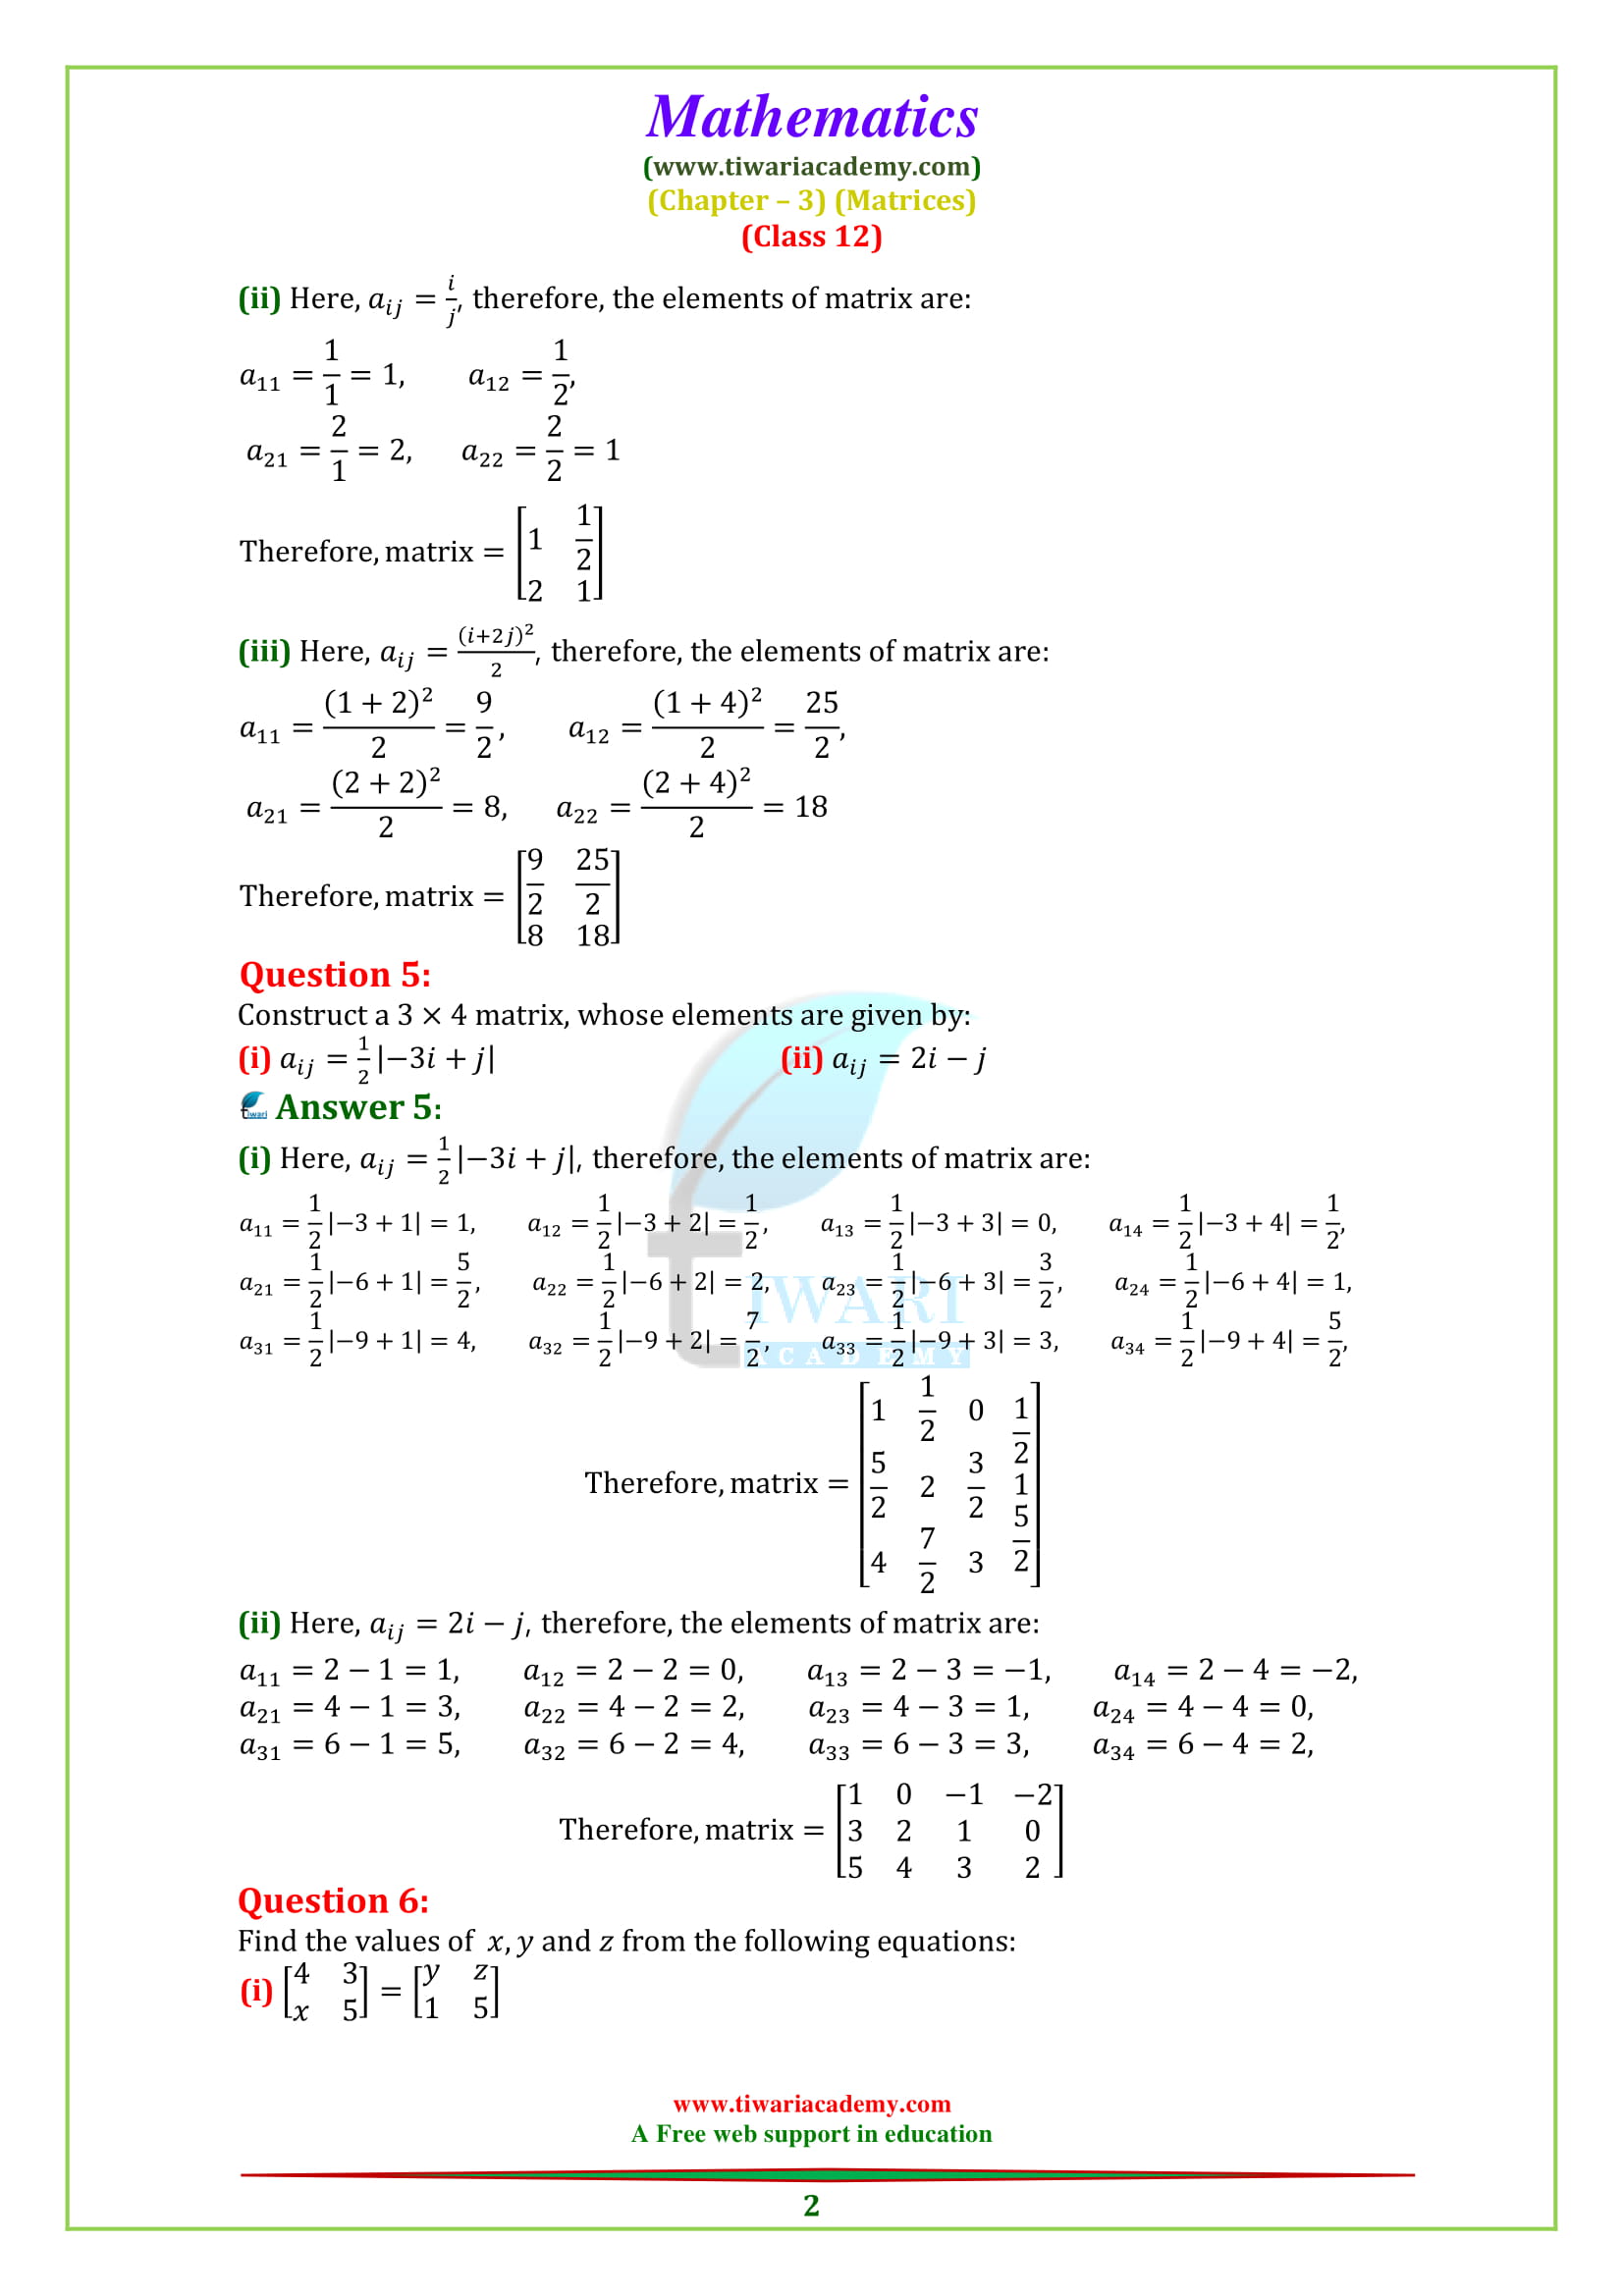 NCERT Solutions for Class 12 Maths Chapter 3 Exercise 3.1 in PDF